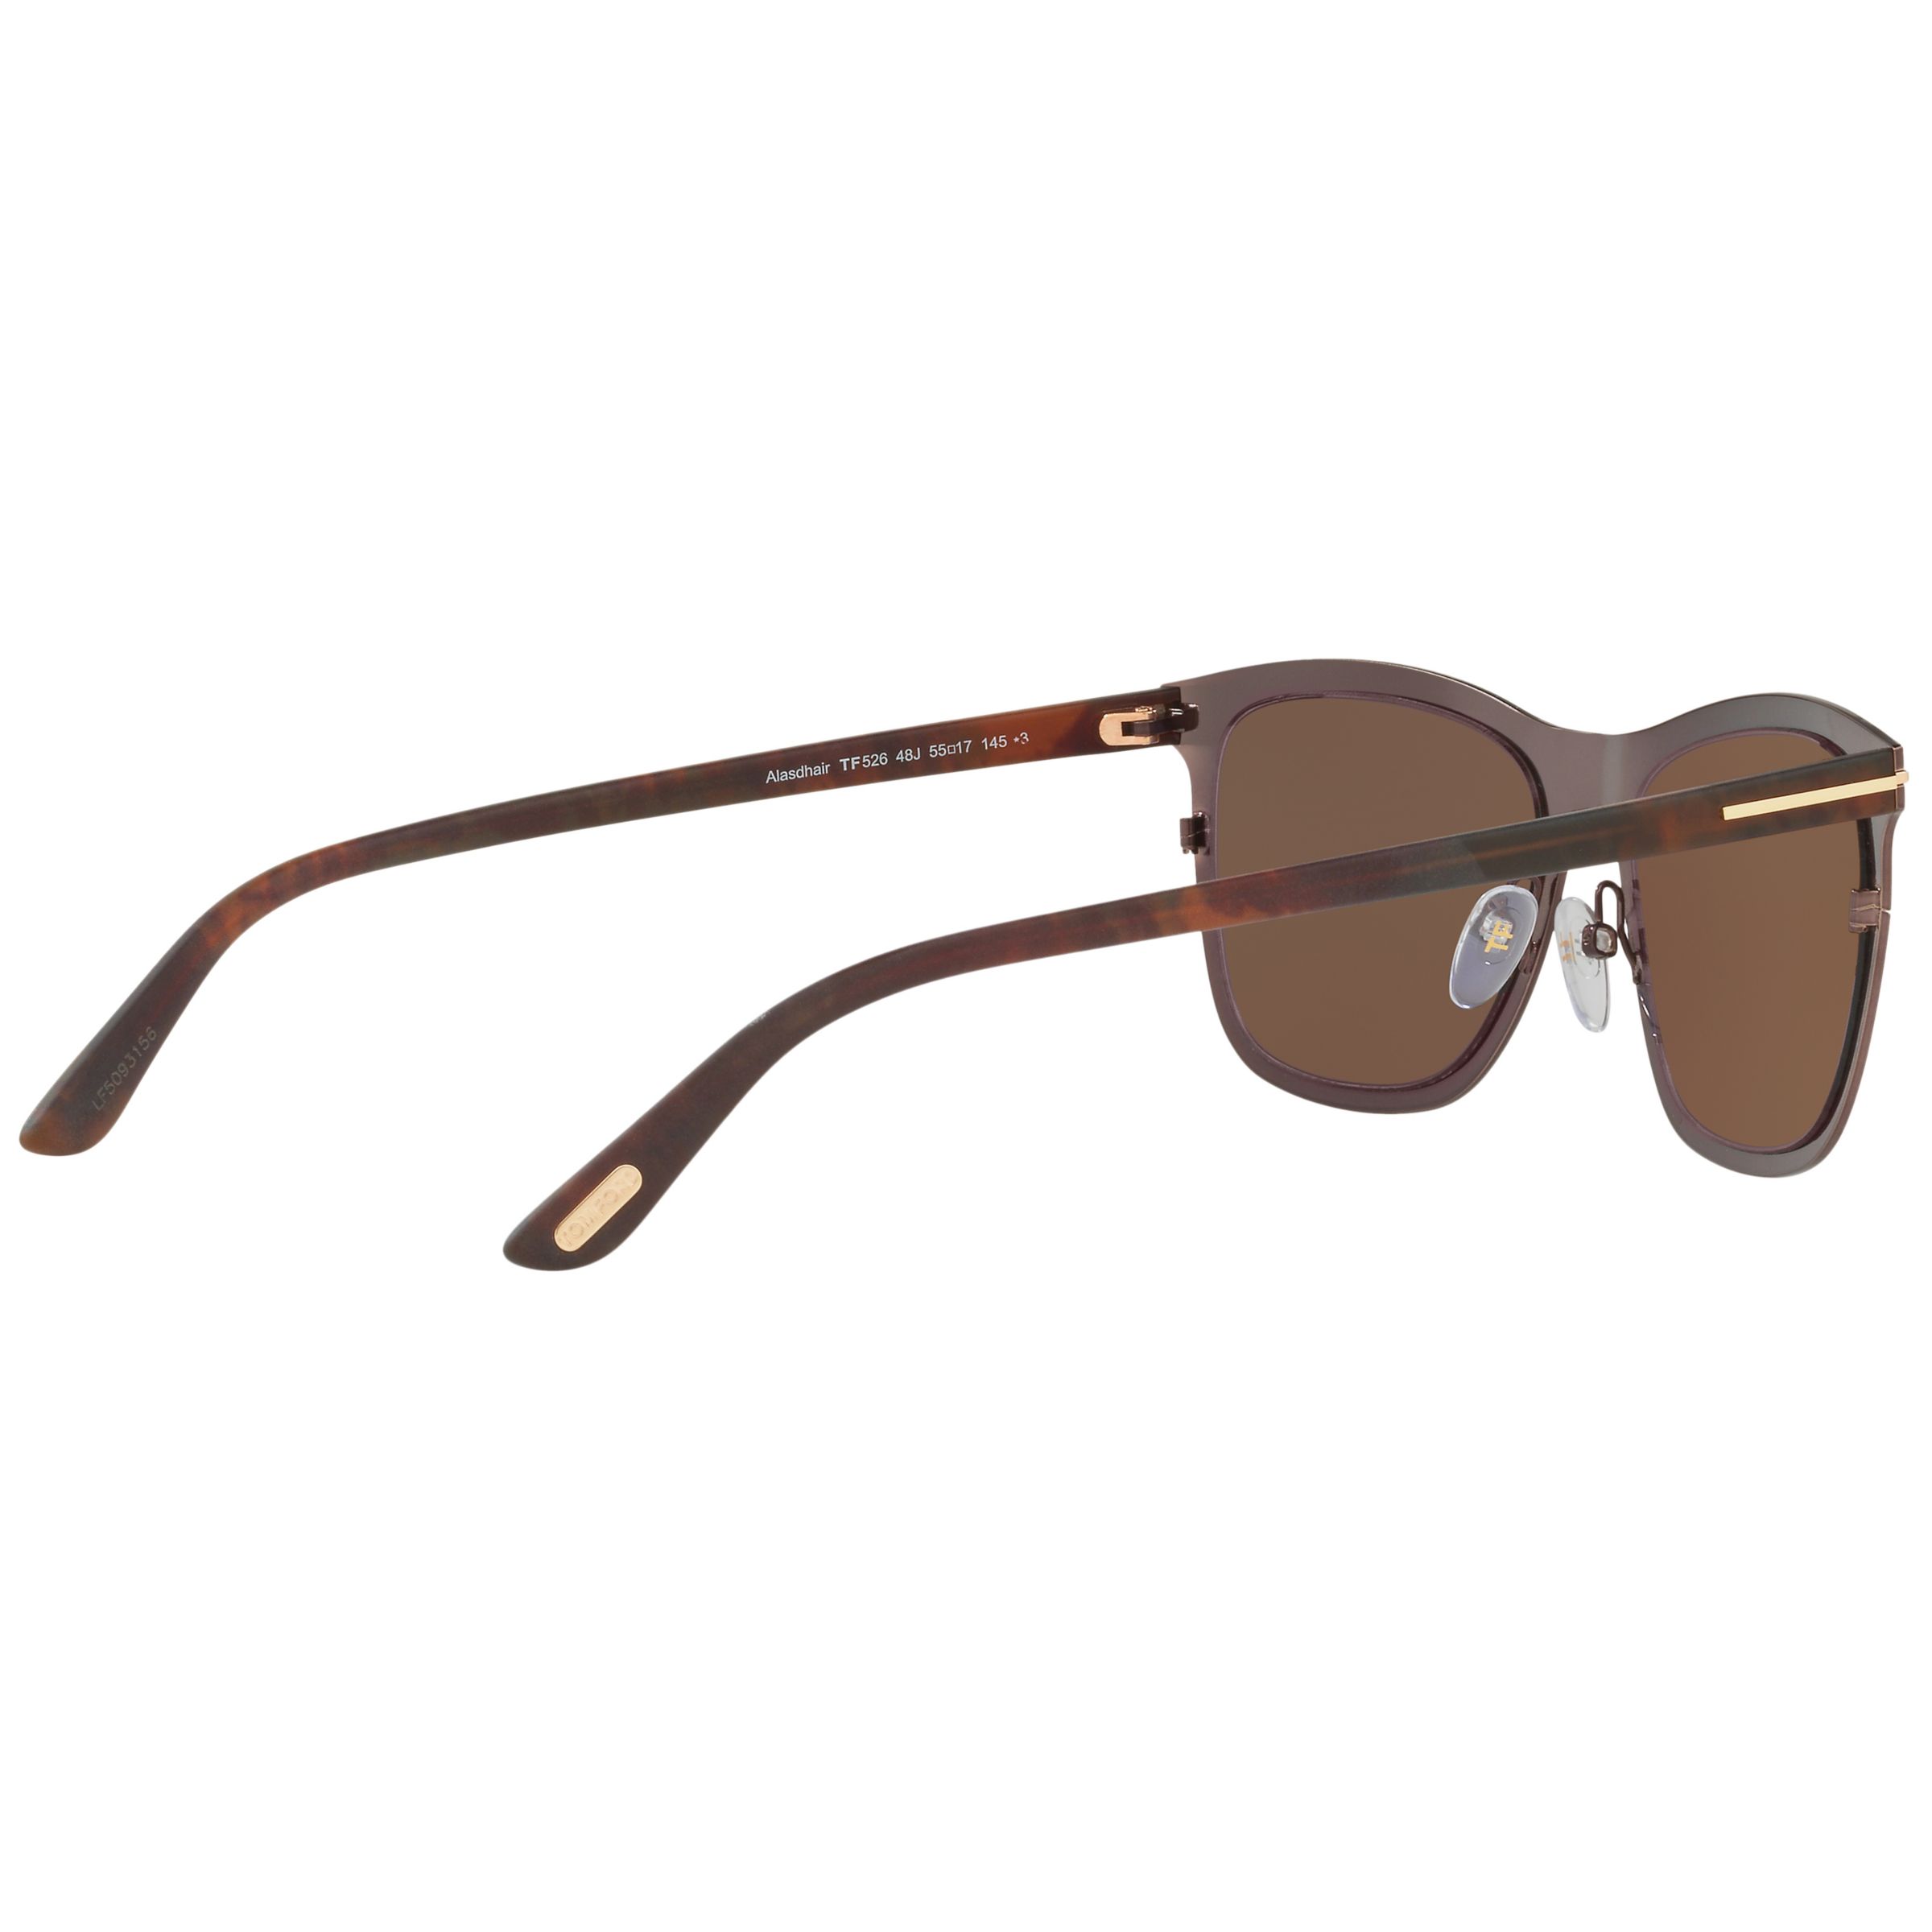 TOM FORD FT0526 Alasdhair Square Sunglasses, Brown at John Lewis & Partners